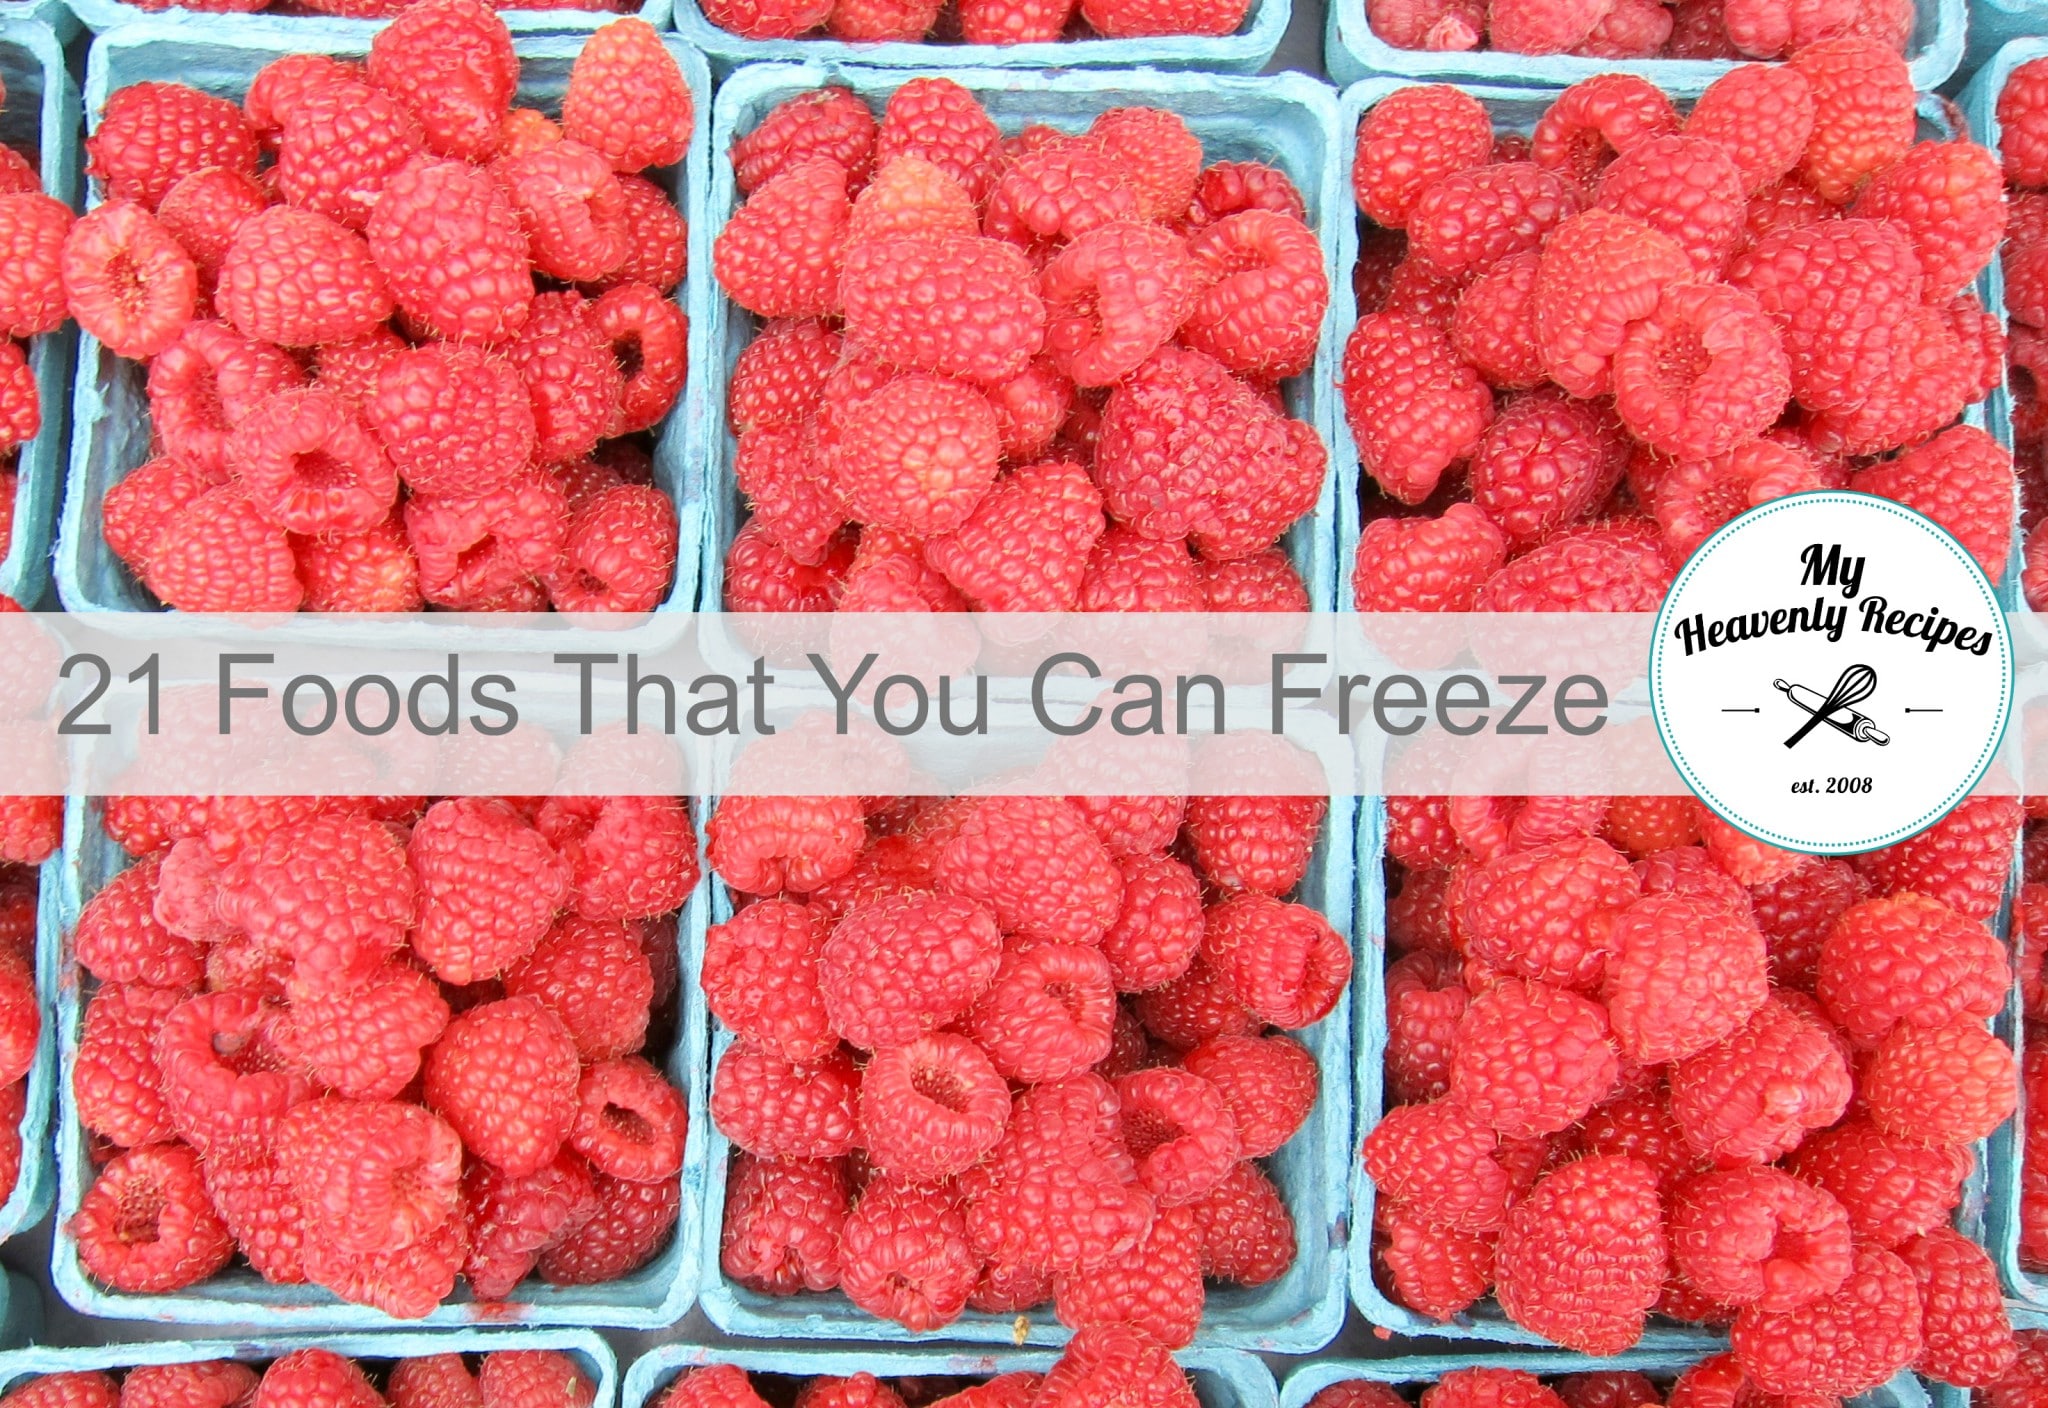 titled photo: 21 Foods that You Can Freeze